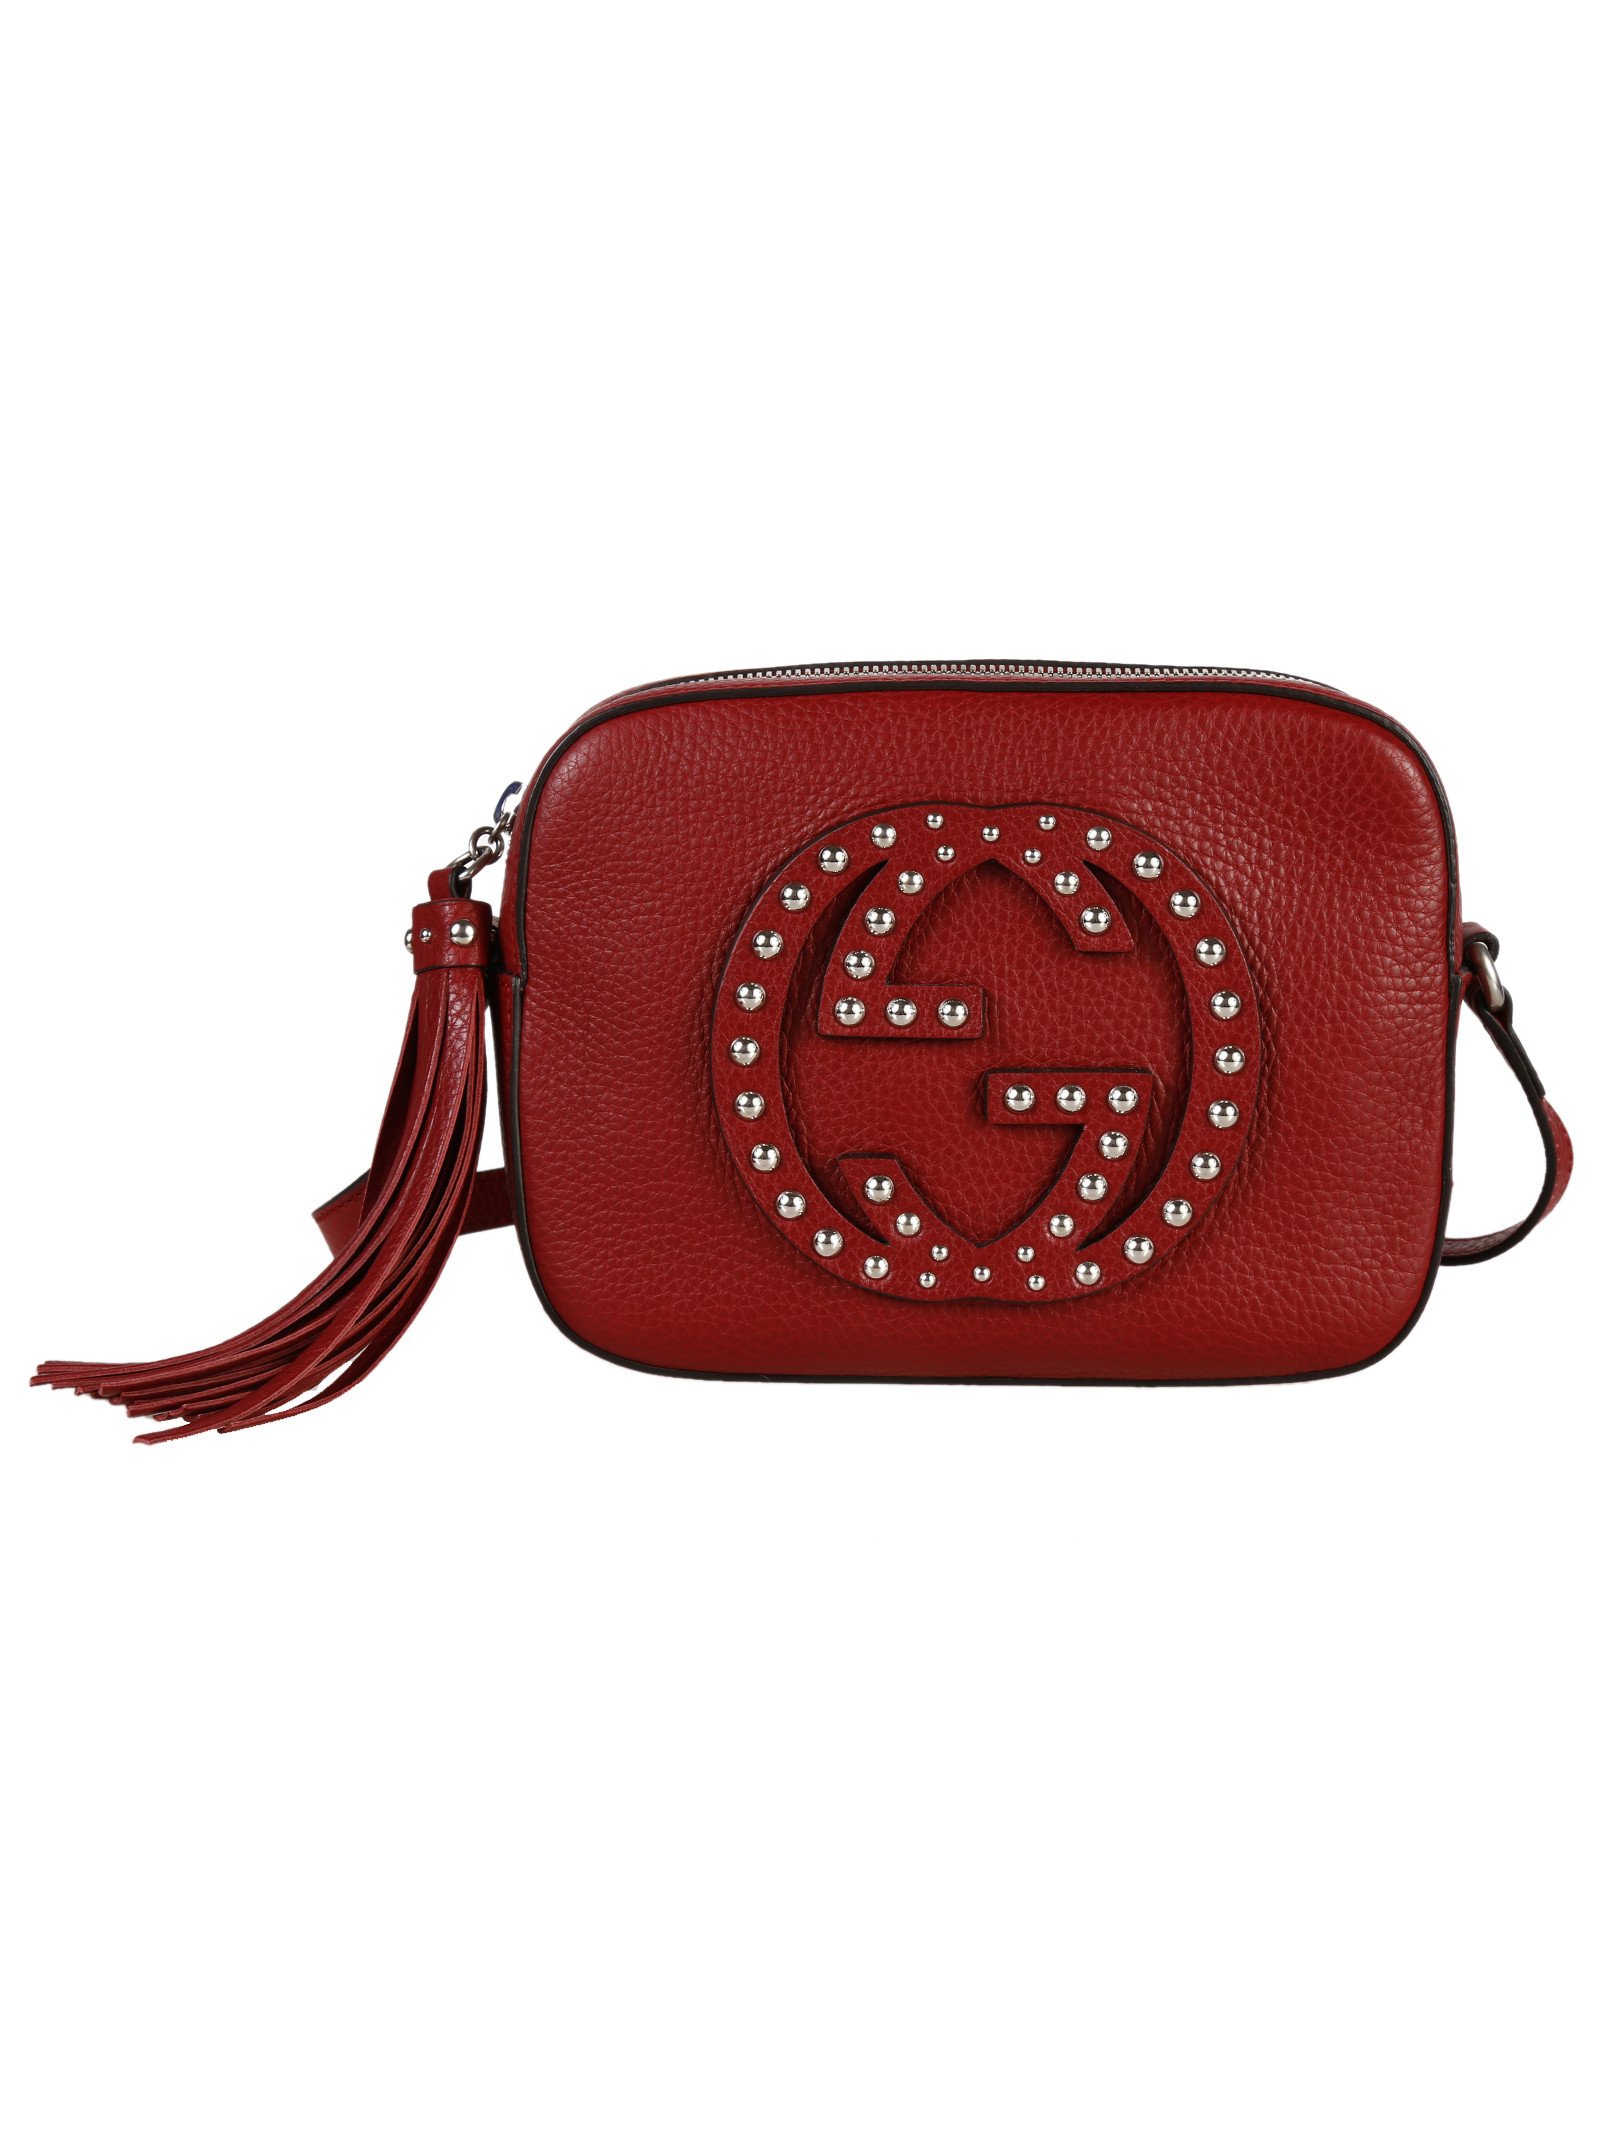 Gucci Red Disco Bag Sale | Confederated Tribes of the Umatilla Indian Reservation